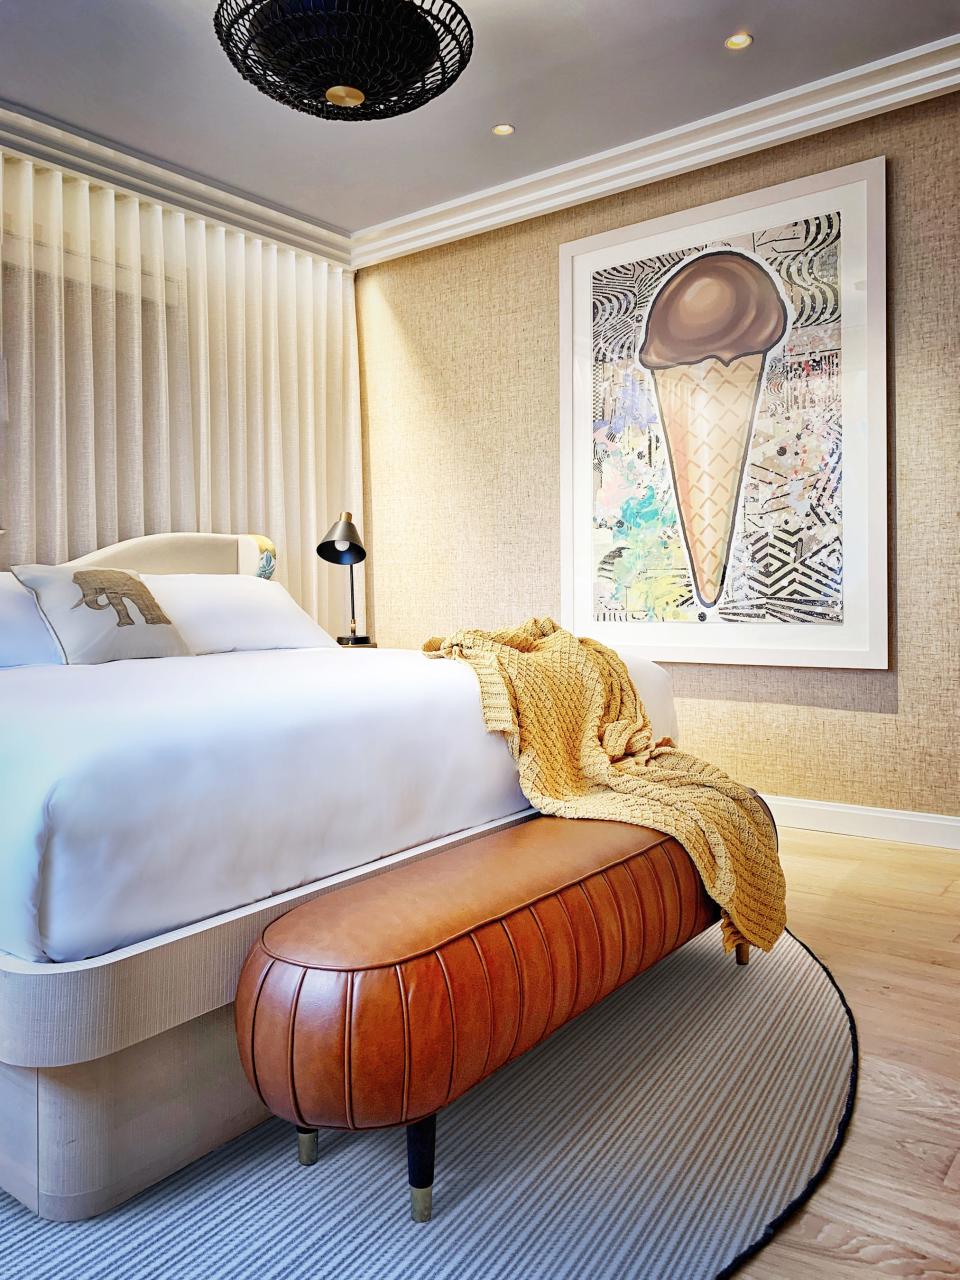 Guestrooms and suites at The White Elephant range from 510 to 3,000 square feet. On the wall of this room is "Chocolate Cone" by Donald Baeschler.